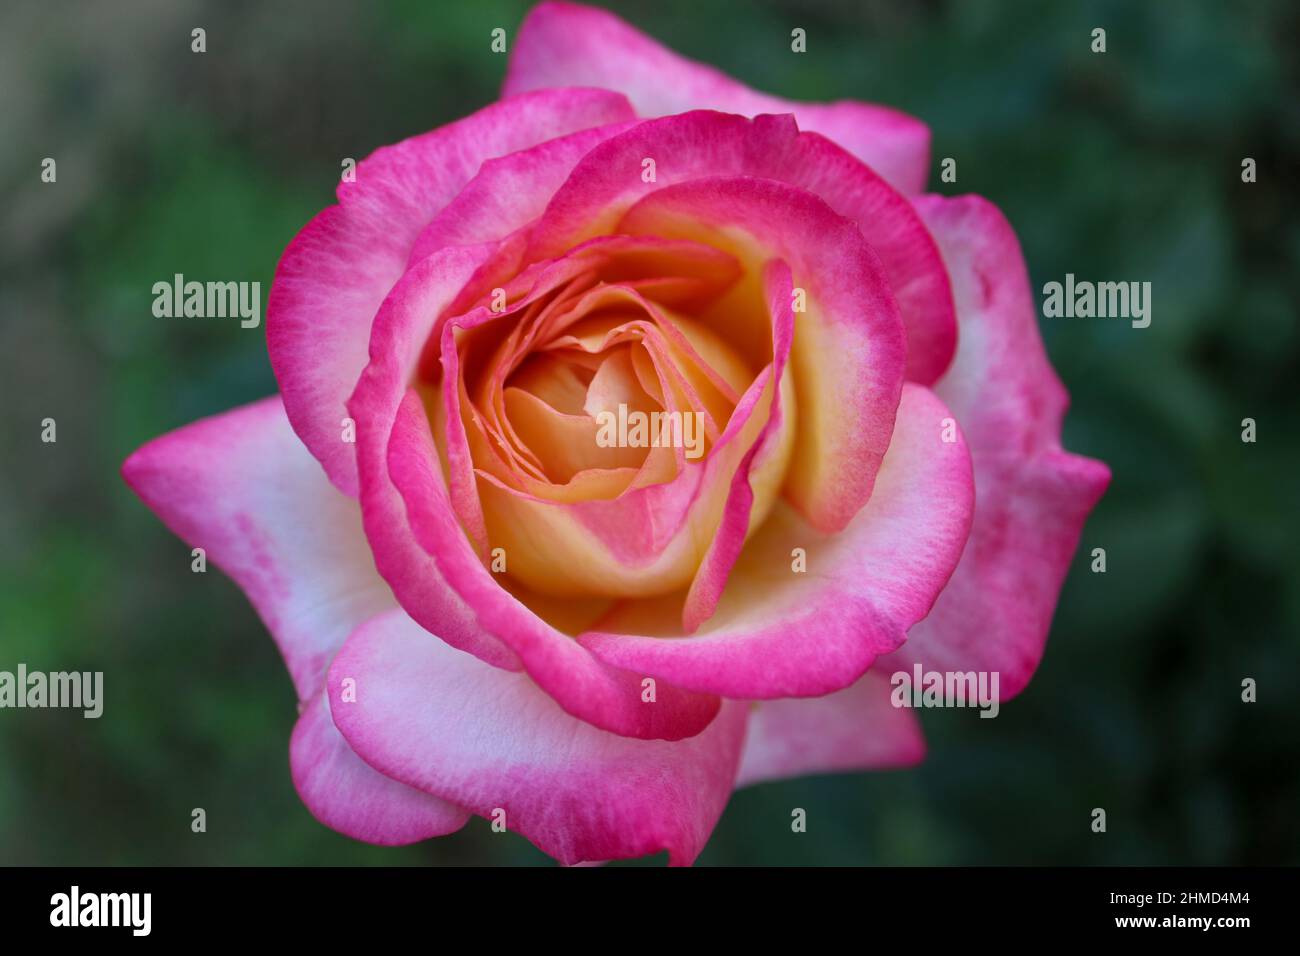 Rose with pink ,white  and yellow petals and green leaves, colorful rose in the garden, rose head macro, blooming flower, beauty in nature, floral Stock Photo